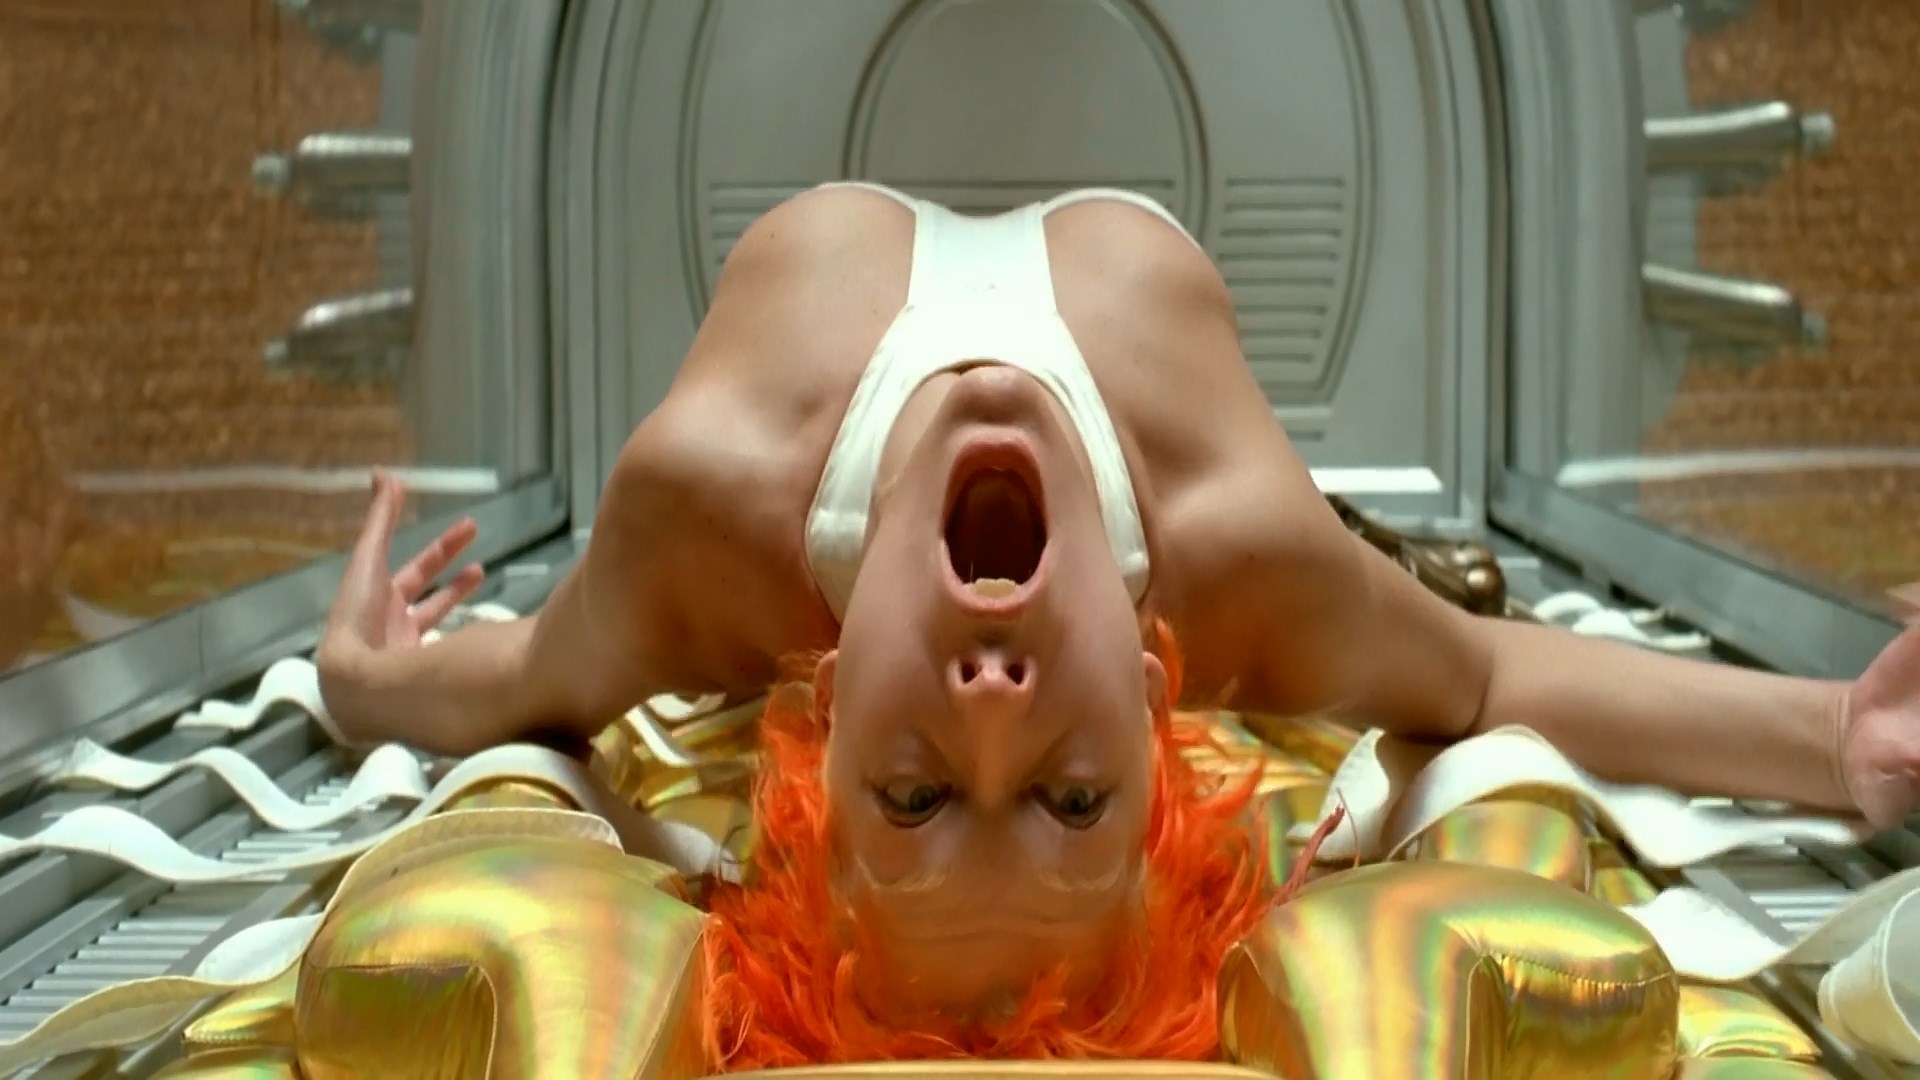 Fifth element nude